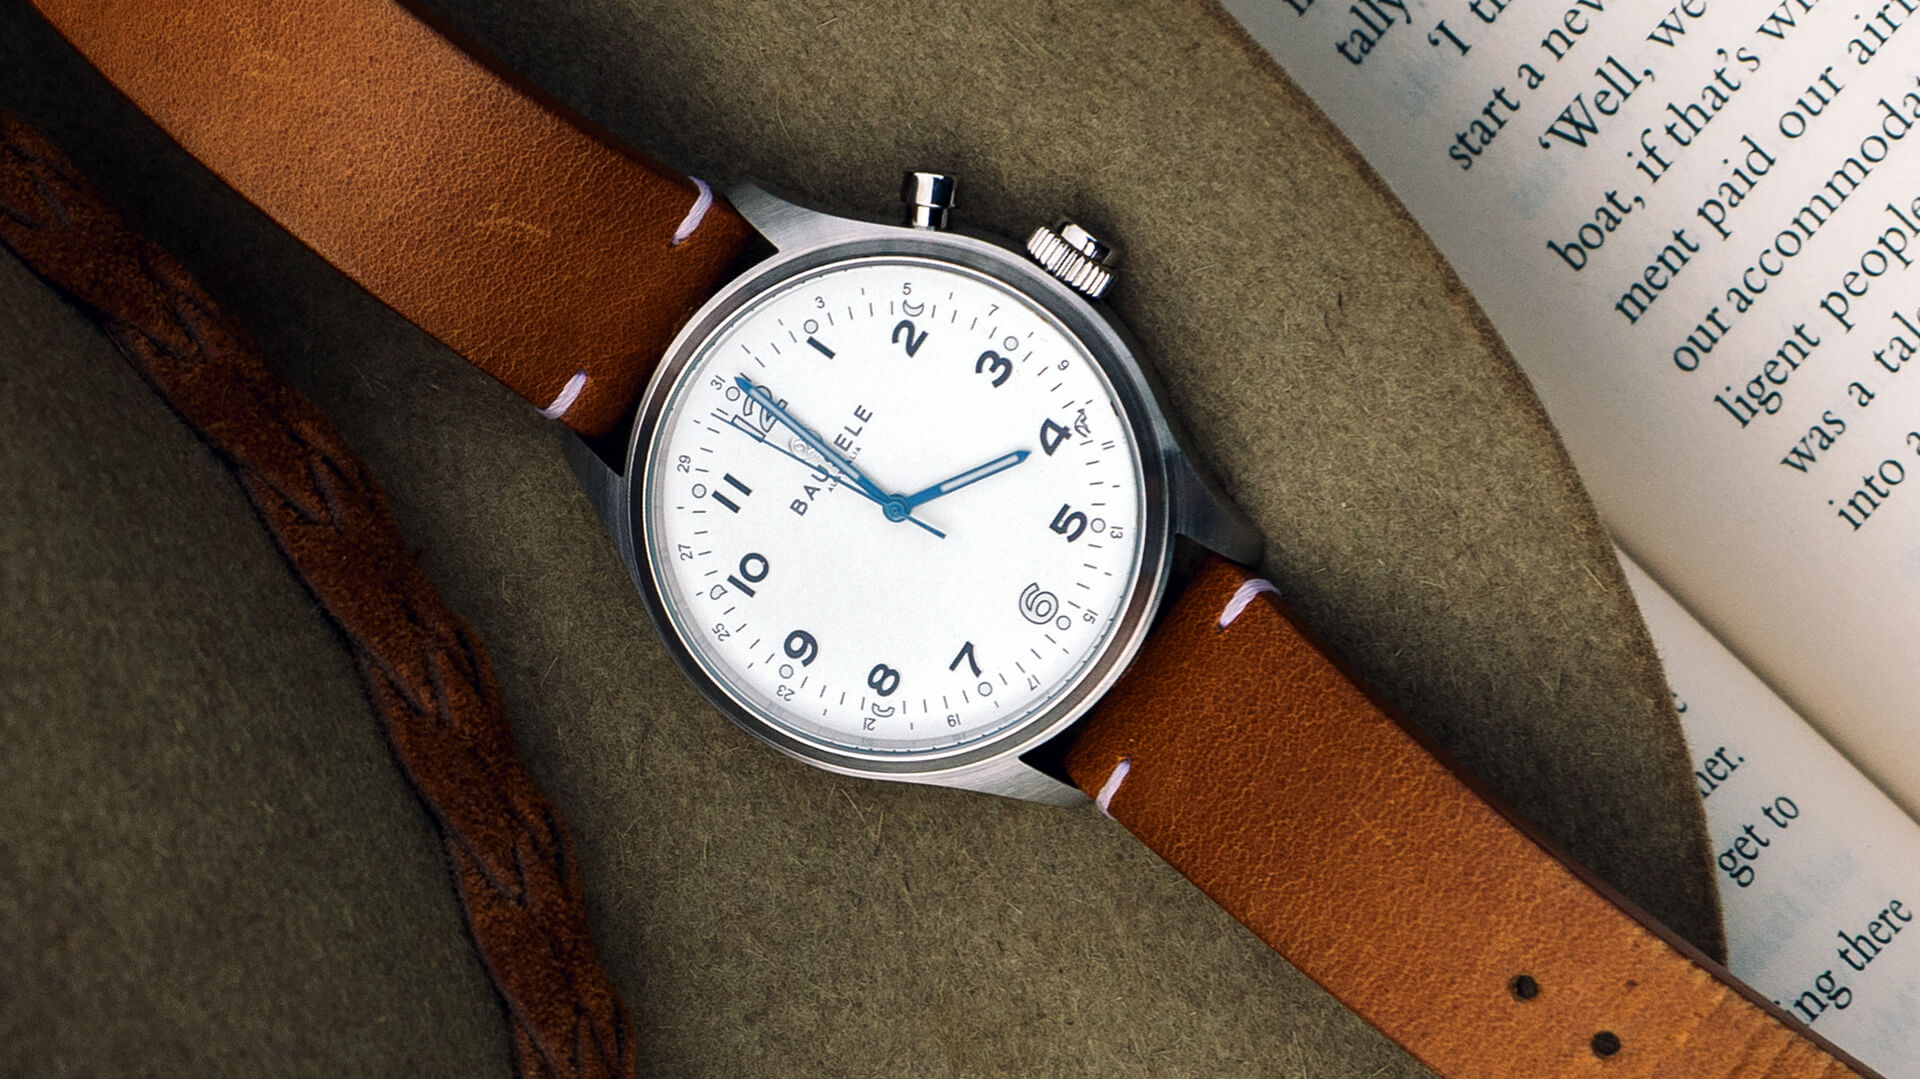 Bausele Combines The Best Of Both Worlds With The Vintage 2.0 Smartwatch